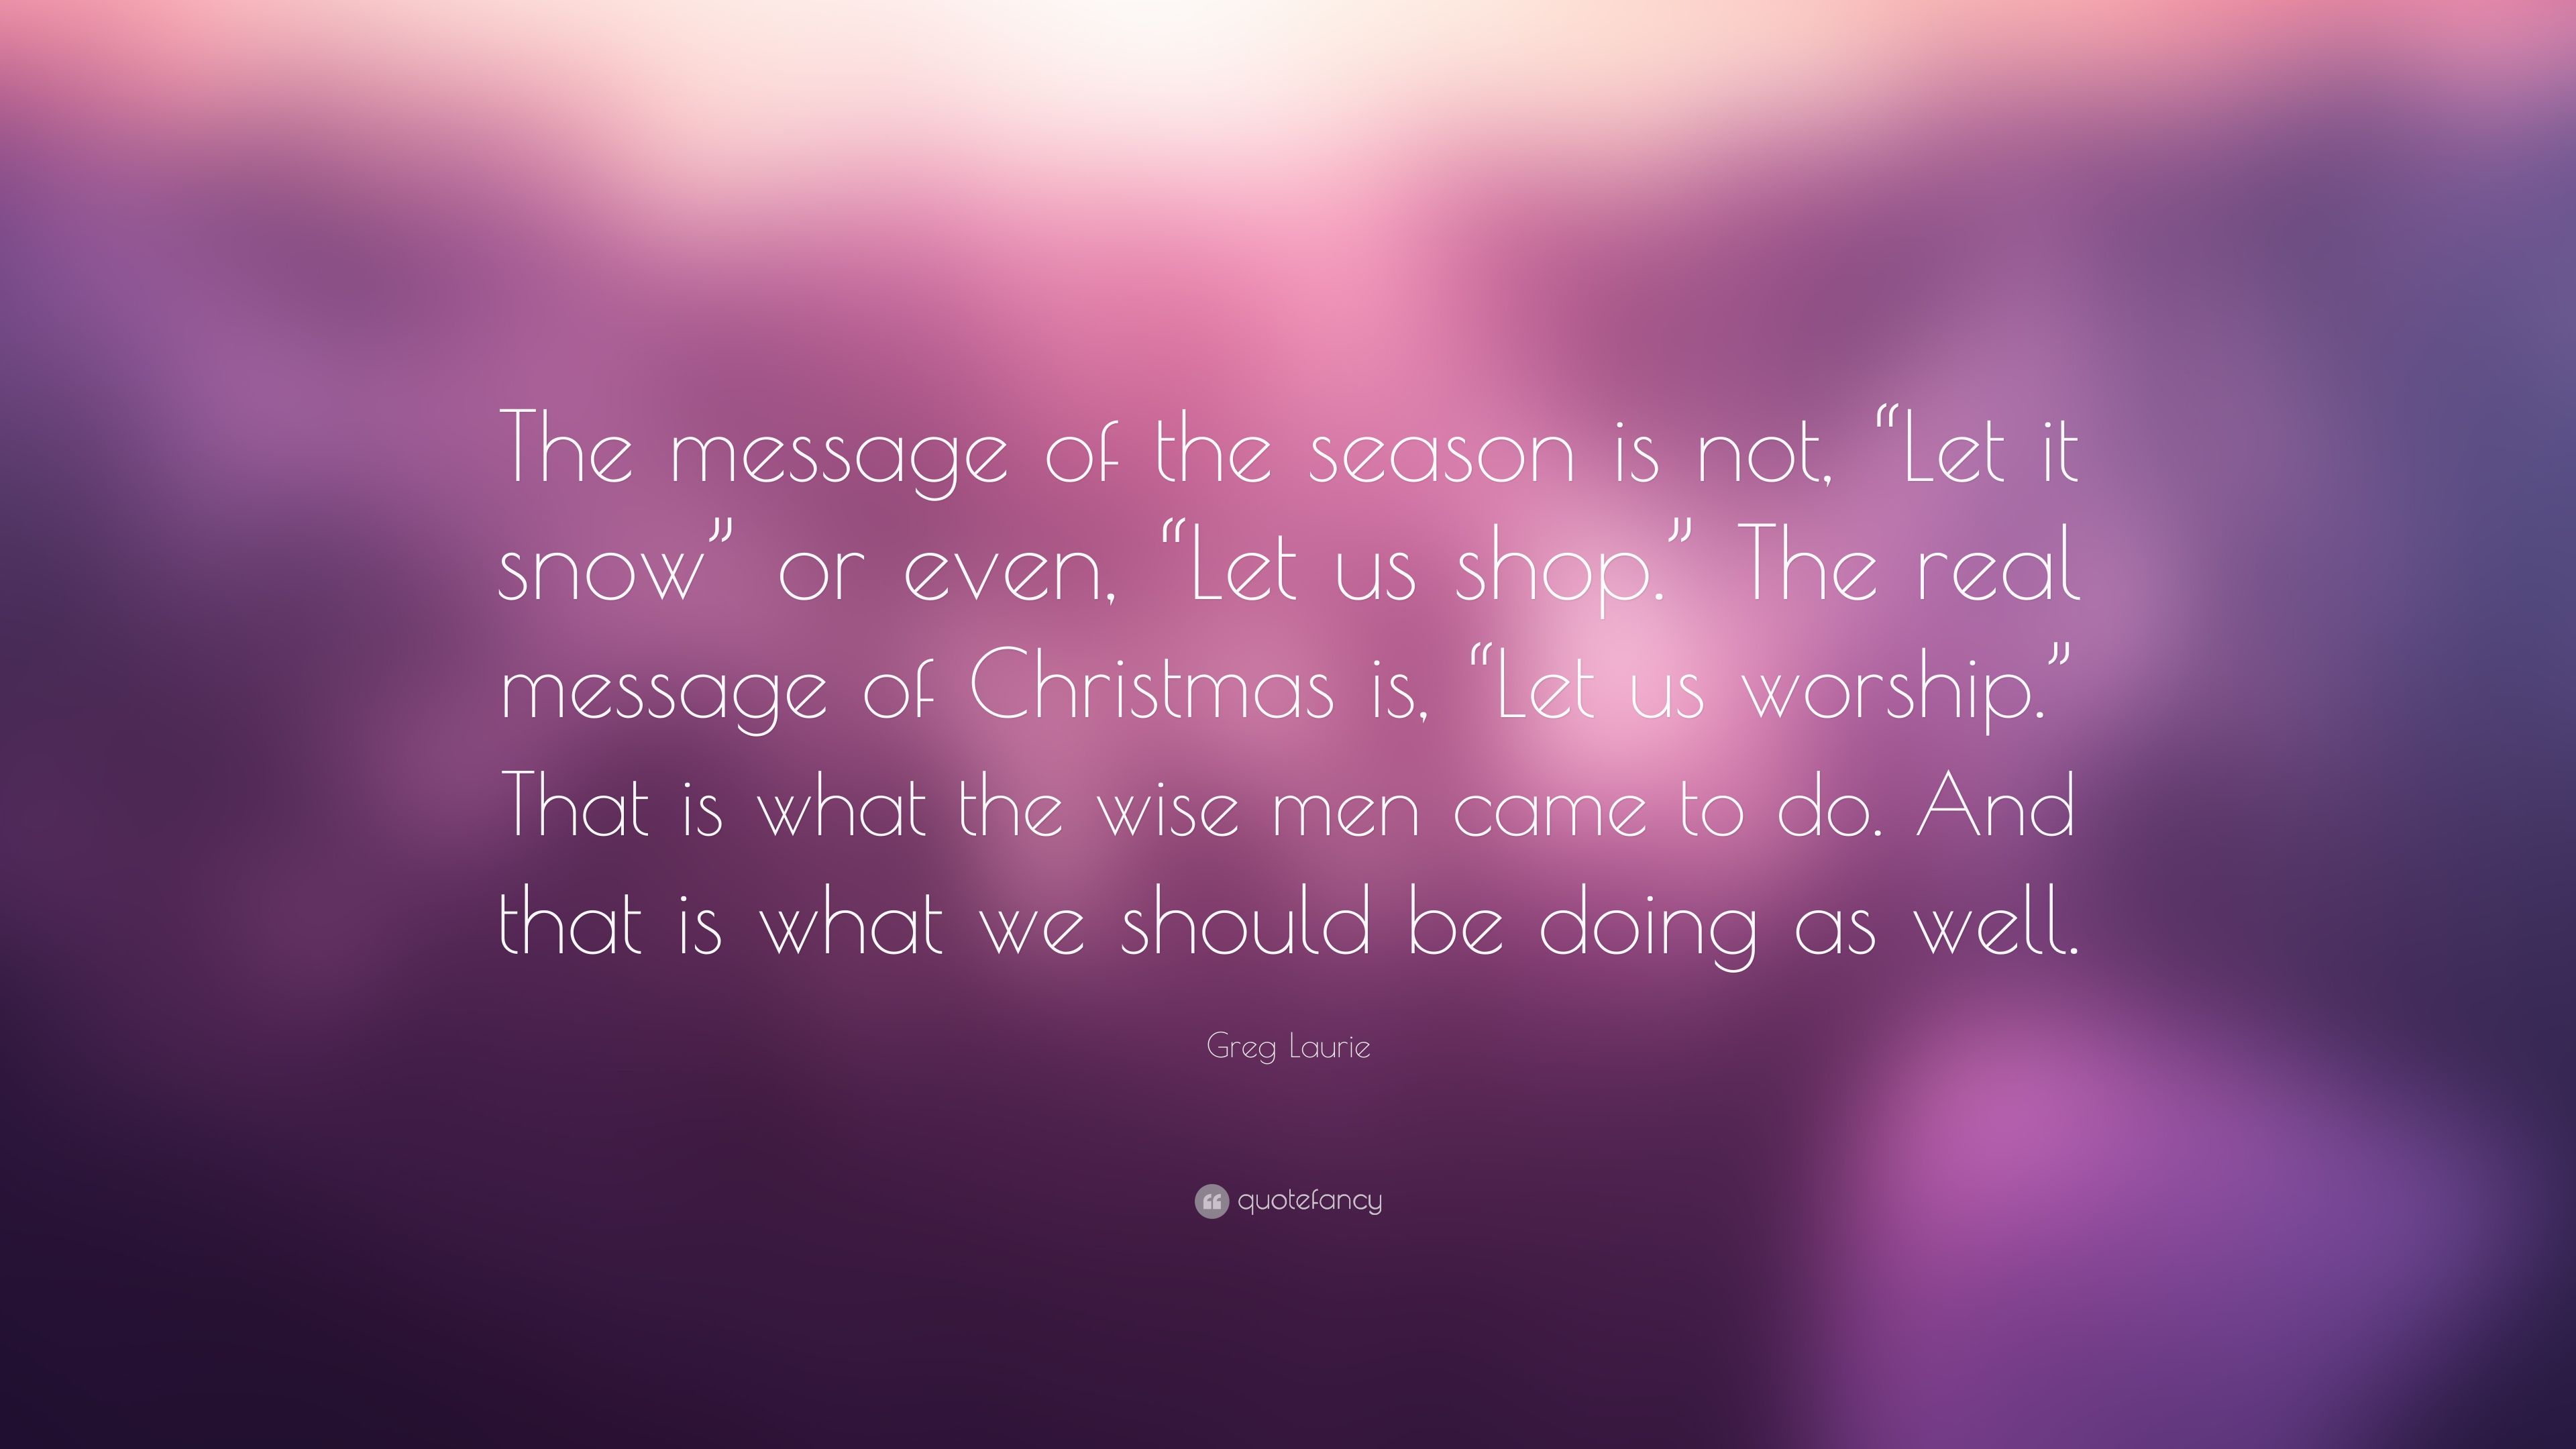 Greg Laurie Quote: “The message of the season is not, “Let it snow” or even, “Let us shop.” The real message of Christmas is, “Let us worshi.” (7 wallpaper)